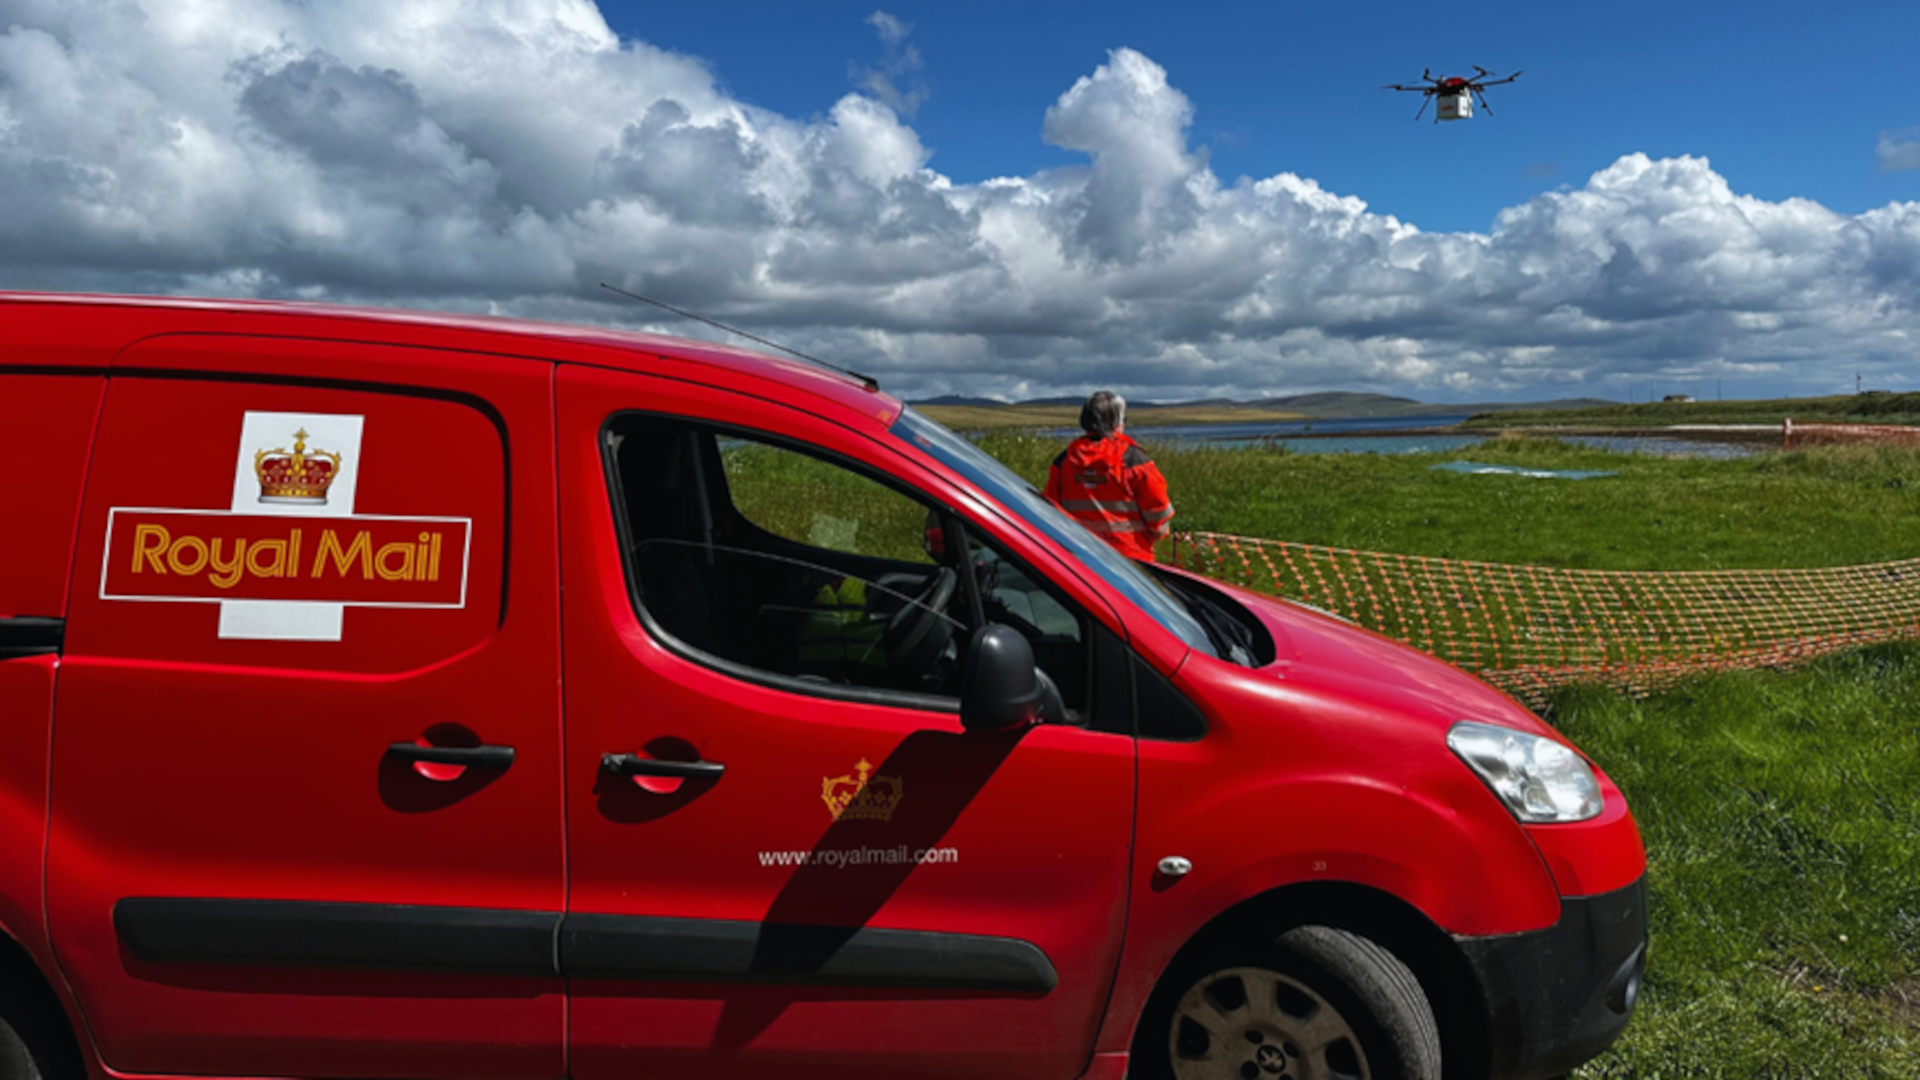 UK’s Royal Mail Launches Drone Delivery to Remote Scottish Islands